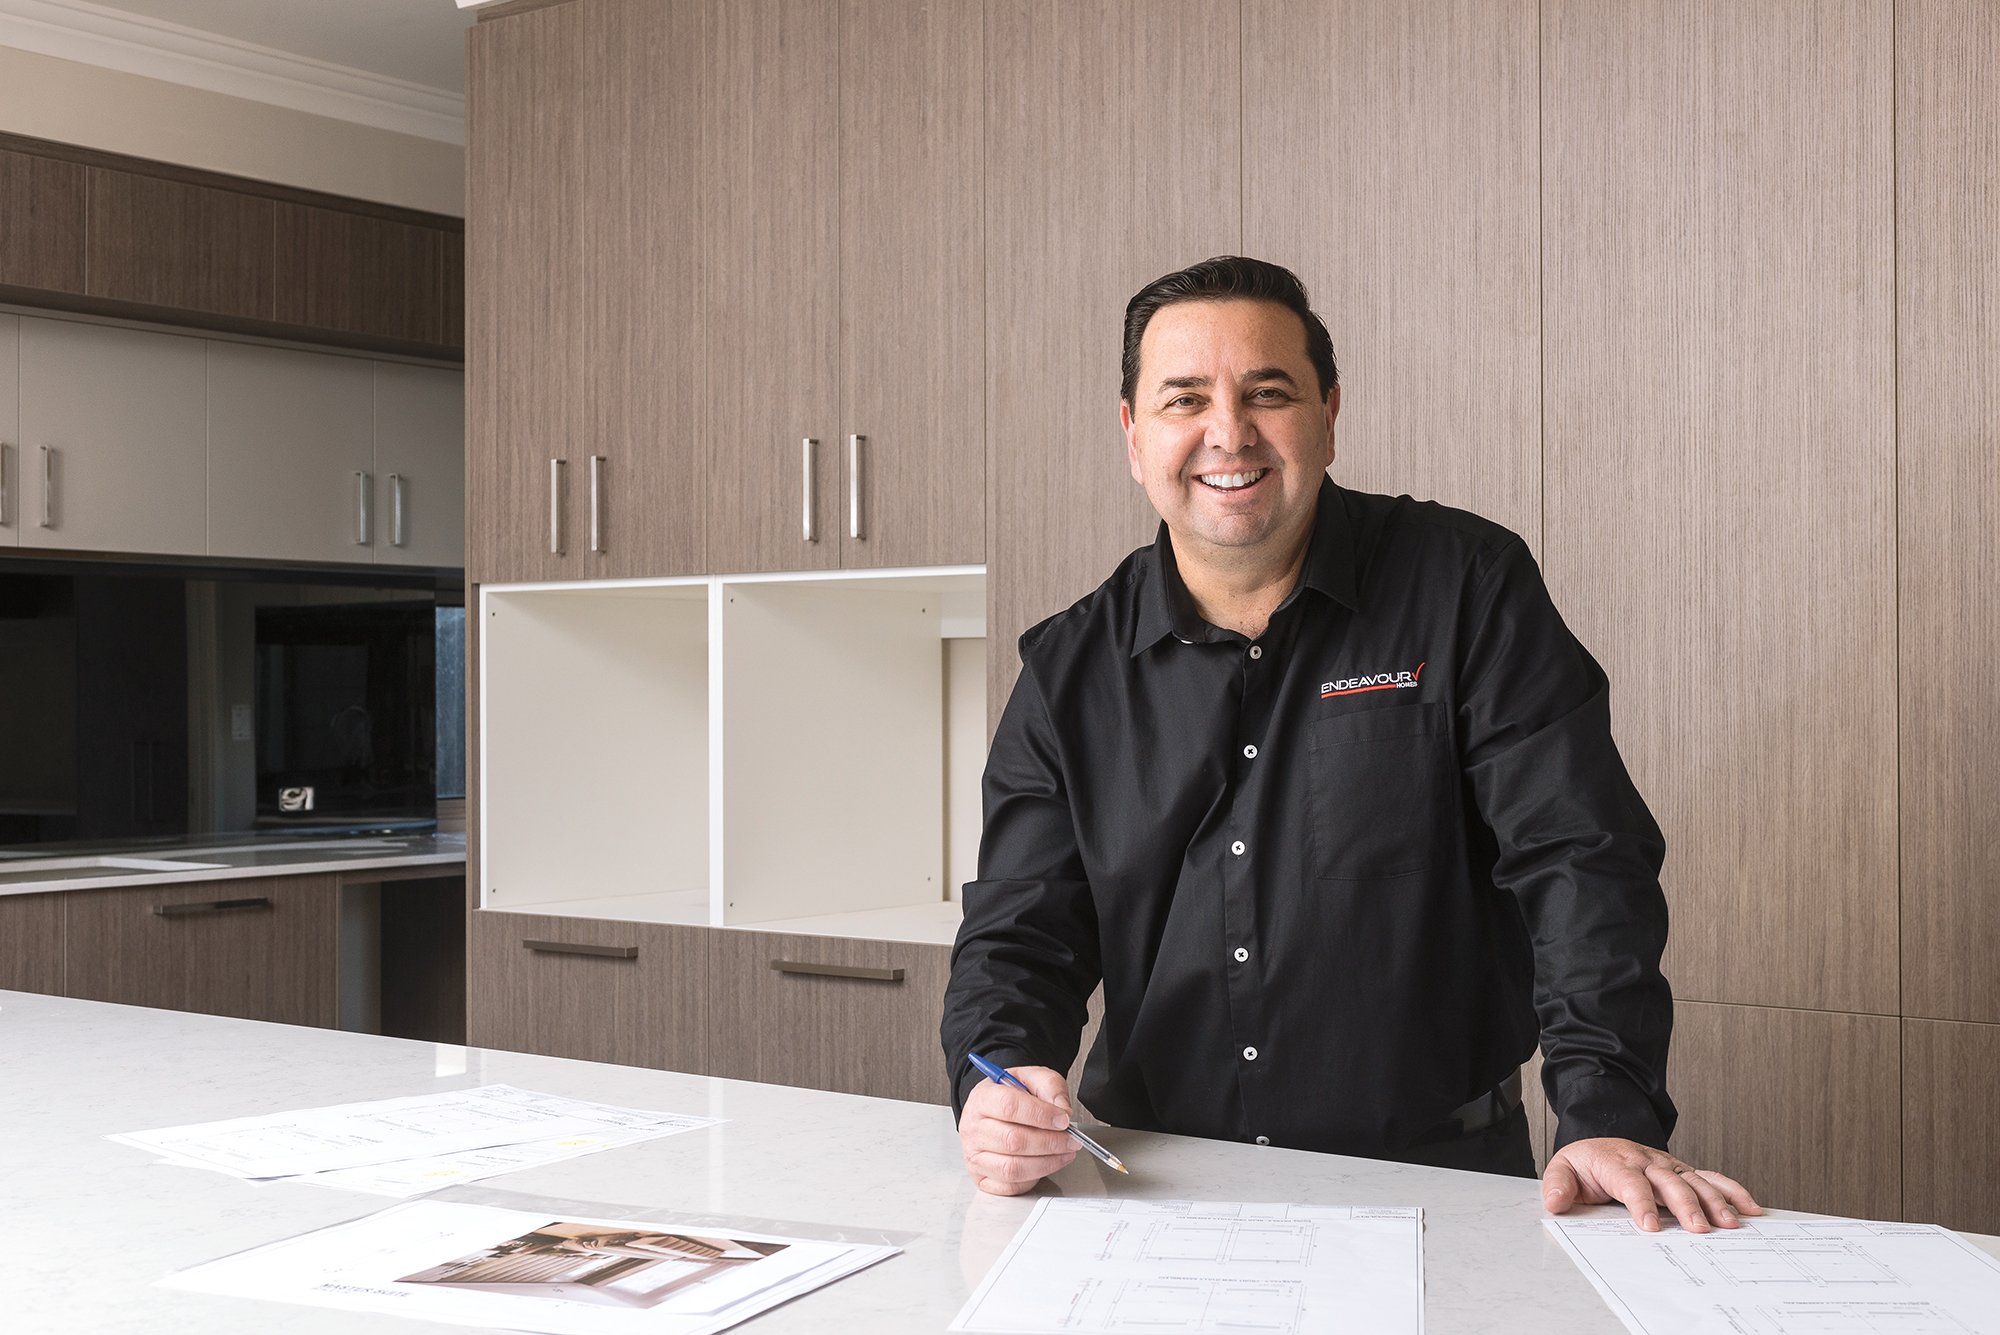 Domenic Morolla, General Manager of Endeavour Homes